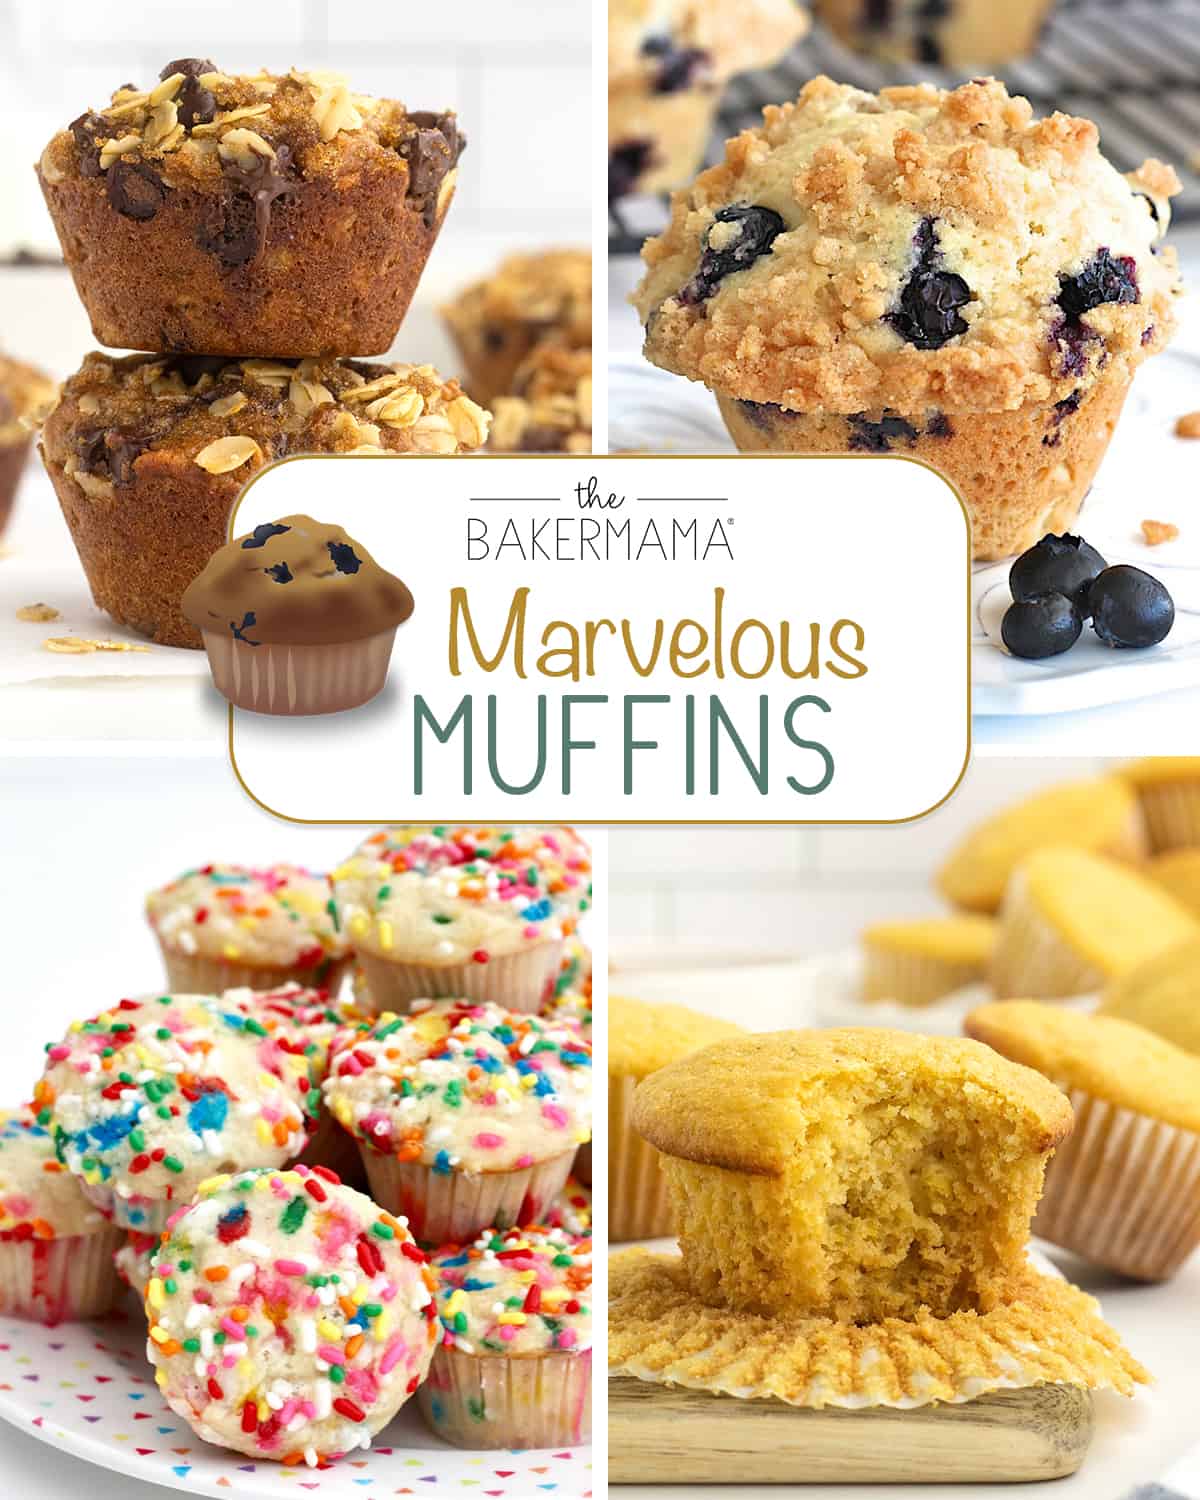 Marvelous Muffin Recipes by The BakerMama